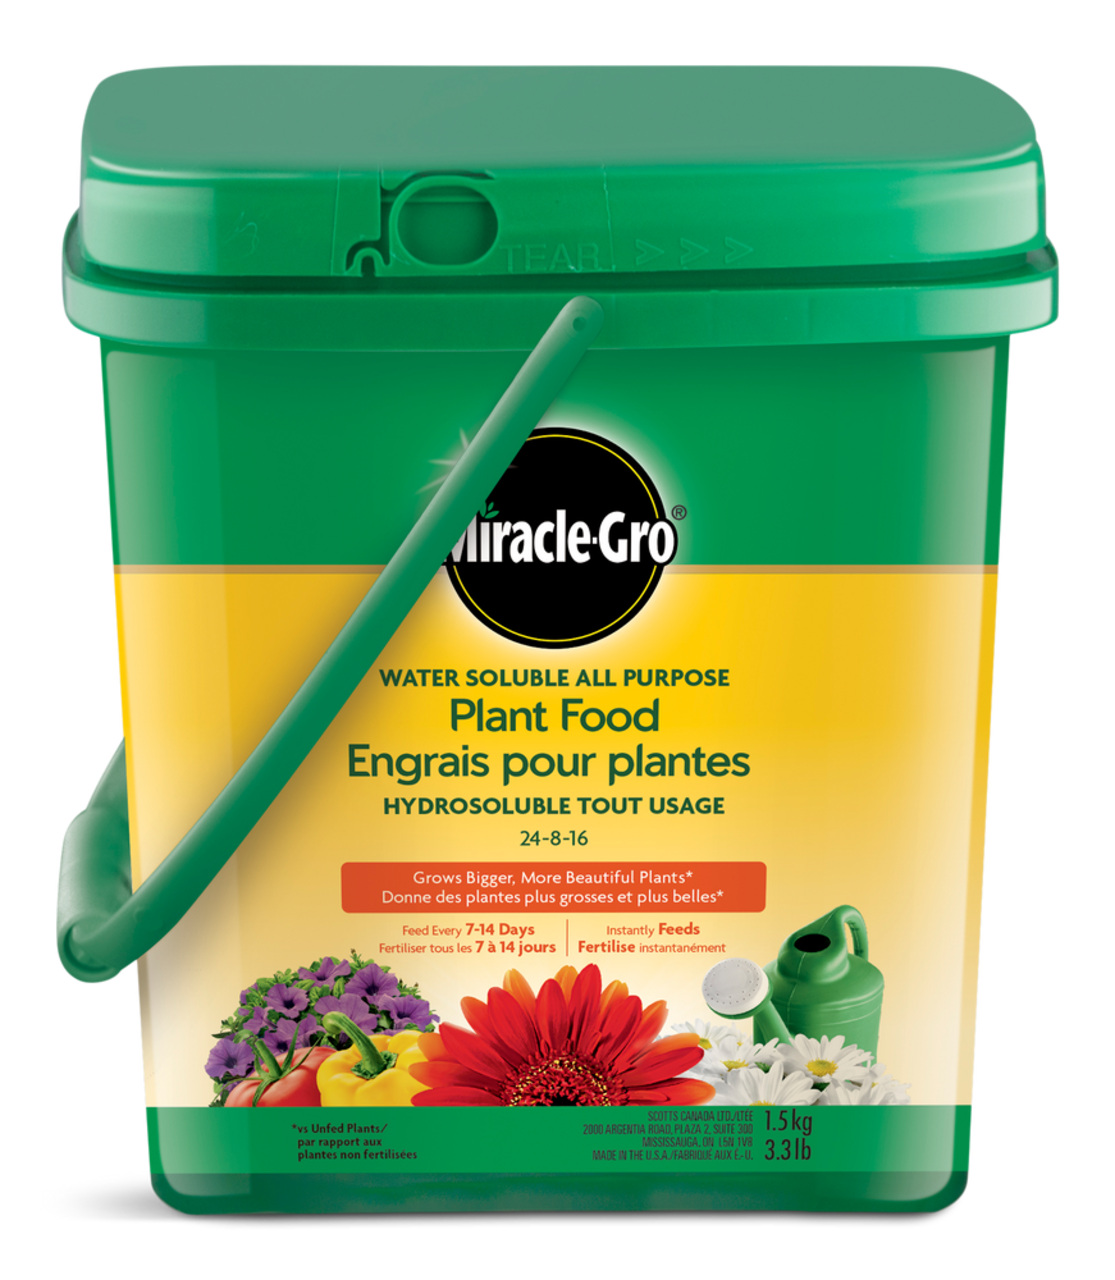 https://media-www.canadiantire.ca/product/seasonal-gardening/gardening/lawn-plant-care/0592251/miraclegro-all-purp-water-soluble-plant-food-24-8-16-1-5kg-4df33d66-0080-4af6-b29e-b56289306fb1.png?imdensity=1&imwidth=1244&impolicy=mZoom